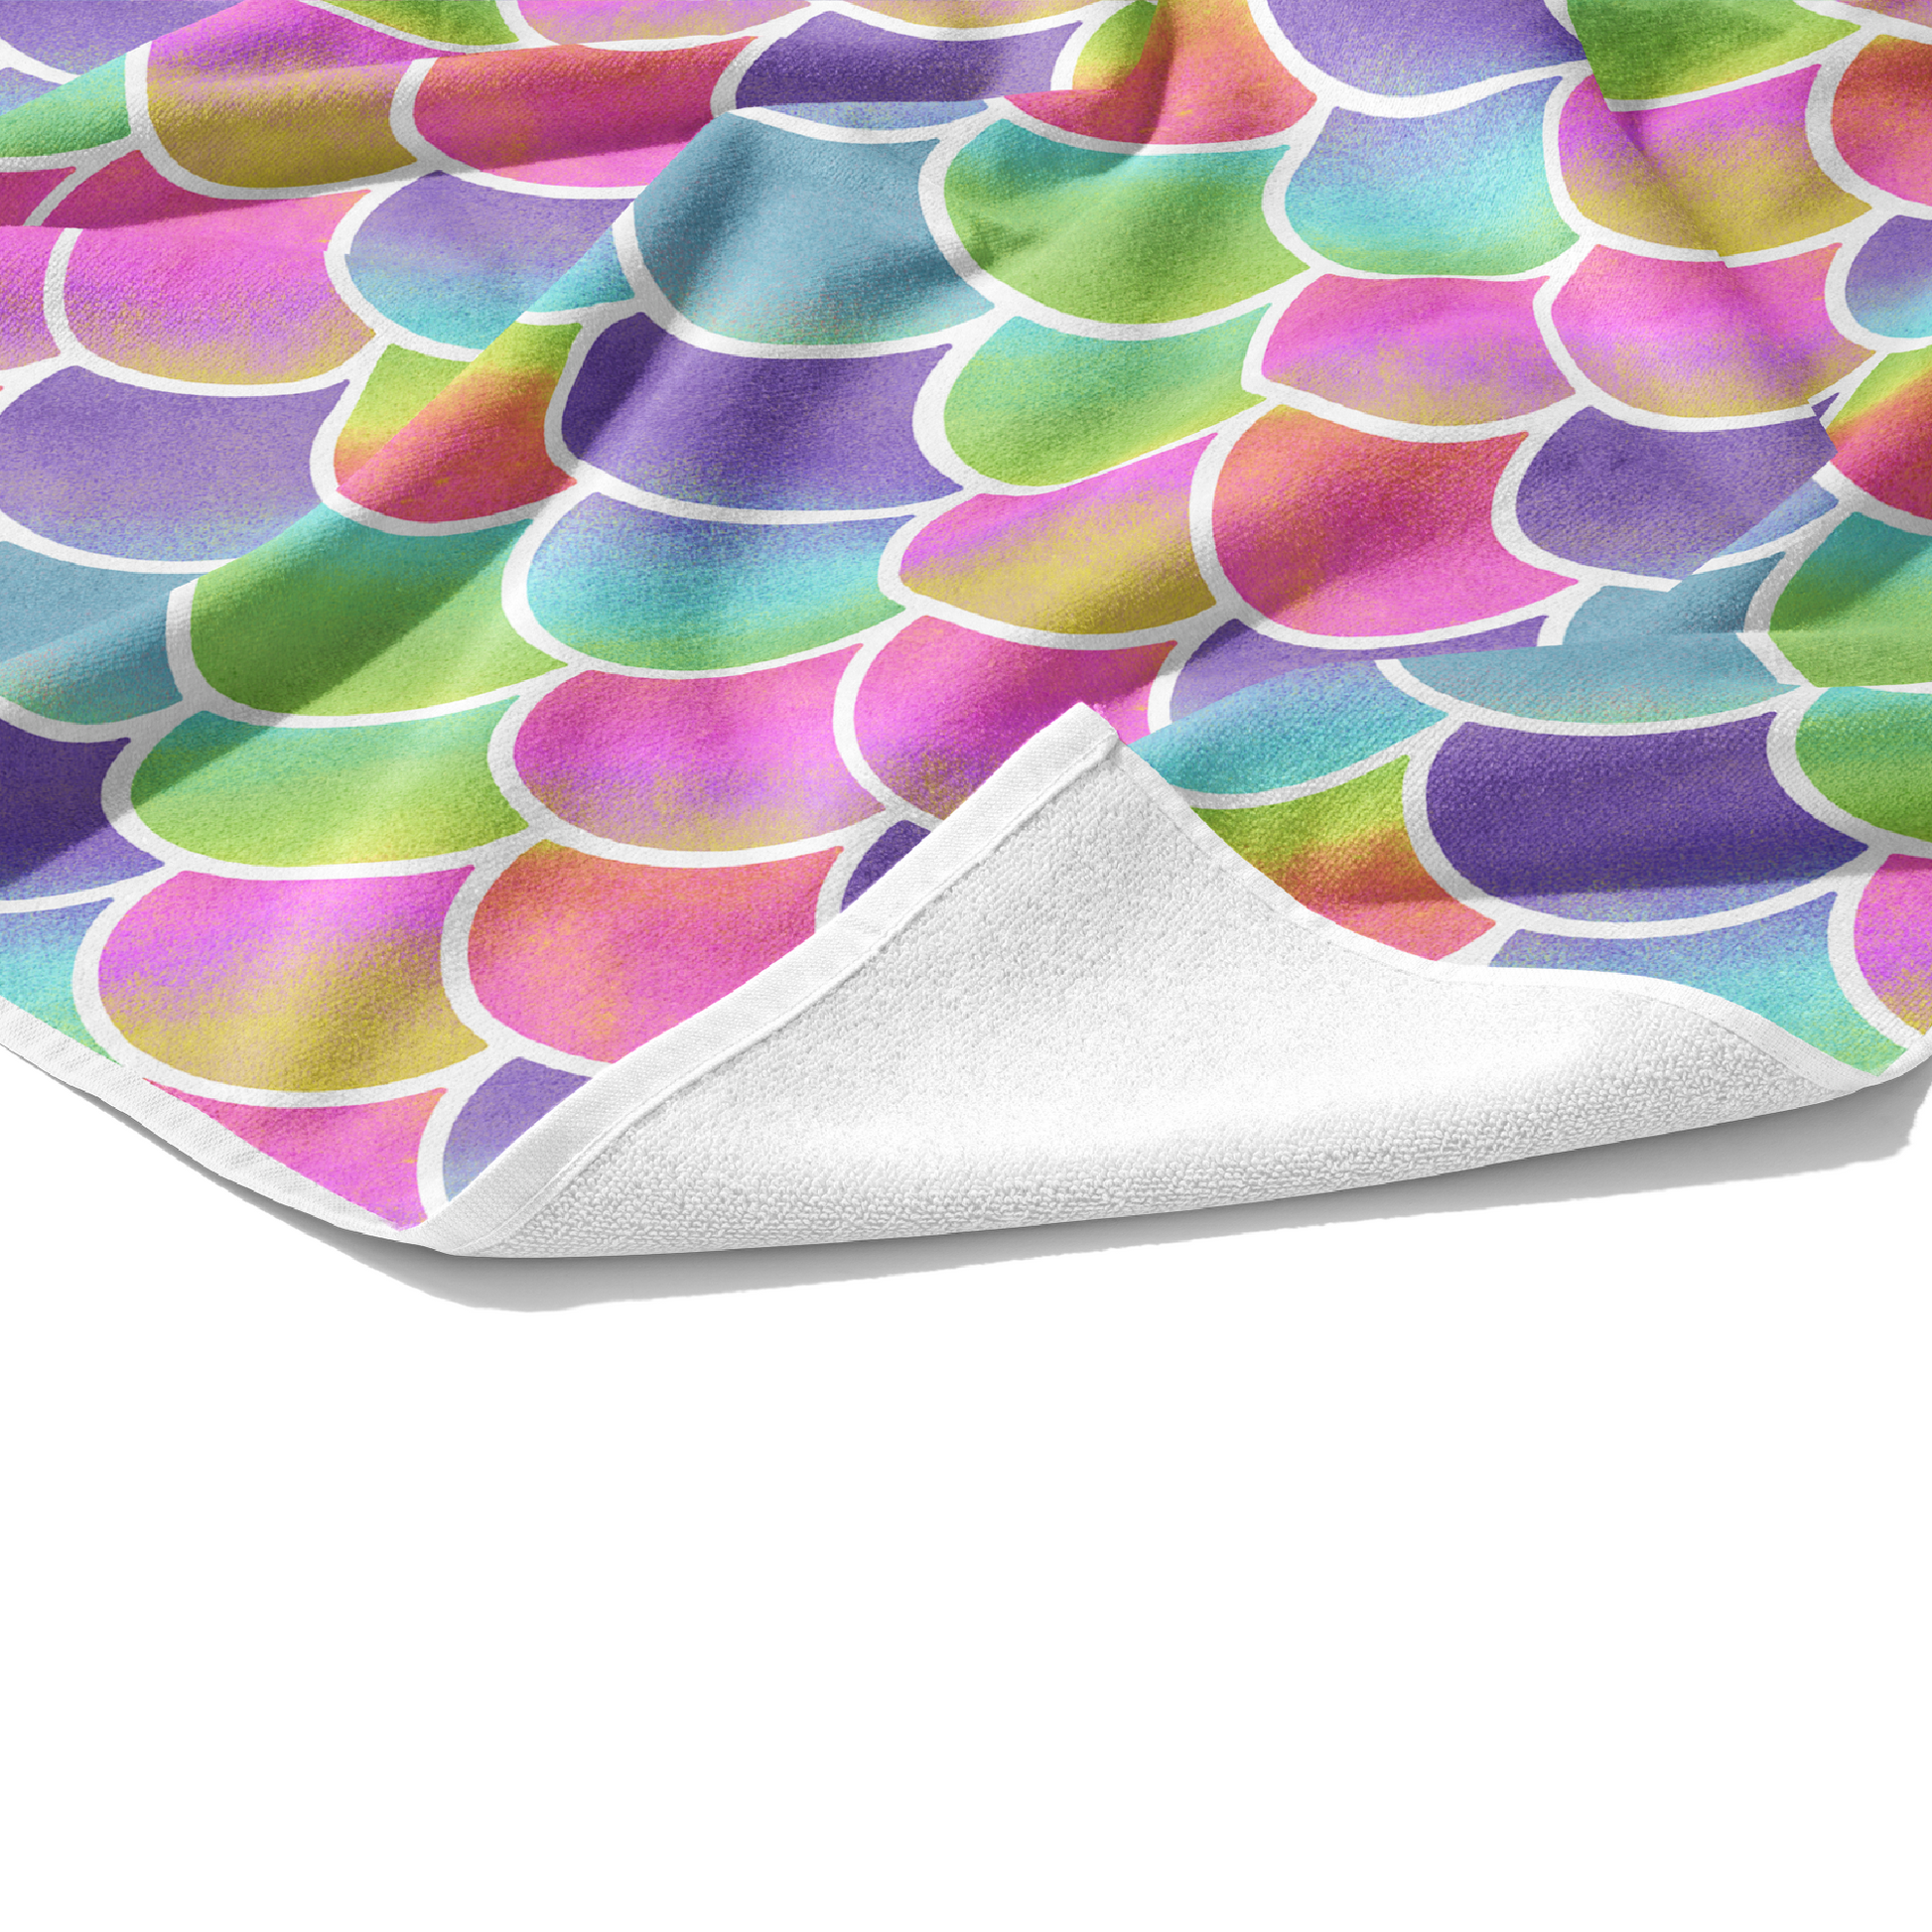 Plush white cotton towel with bright rainbow ombre mermaid scales outlined in white printed on the towel front.